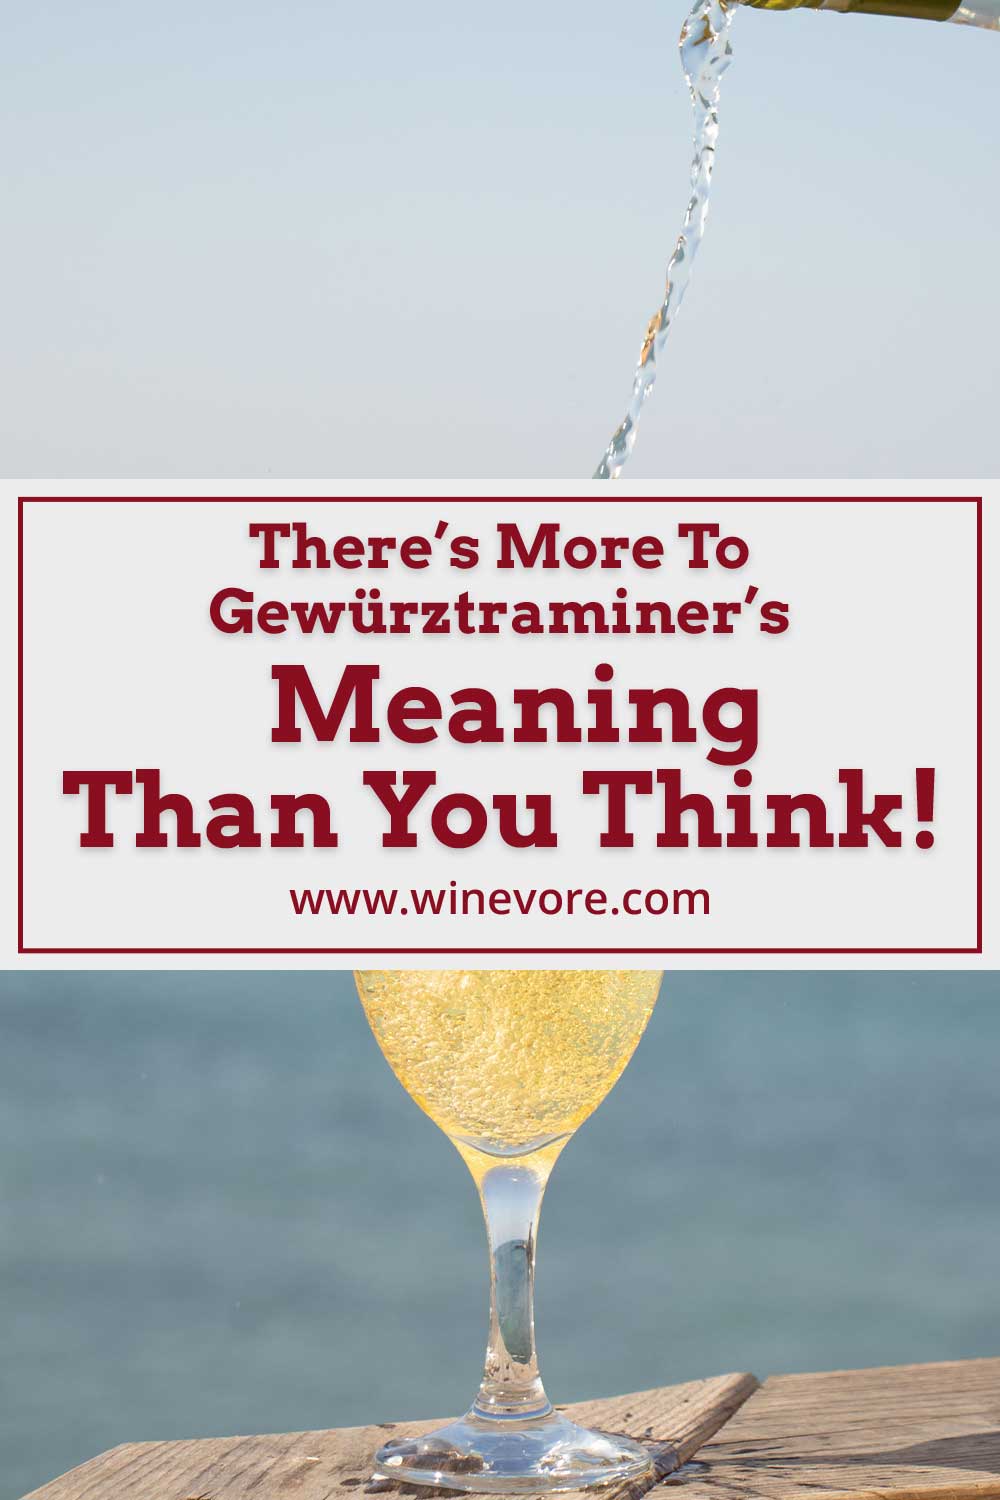 Pouring wine into a glass on a wooden surface outside - Gewürztraminer’s Meaning.